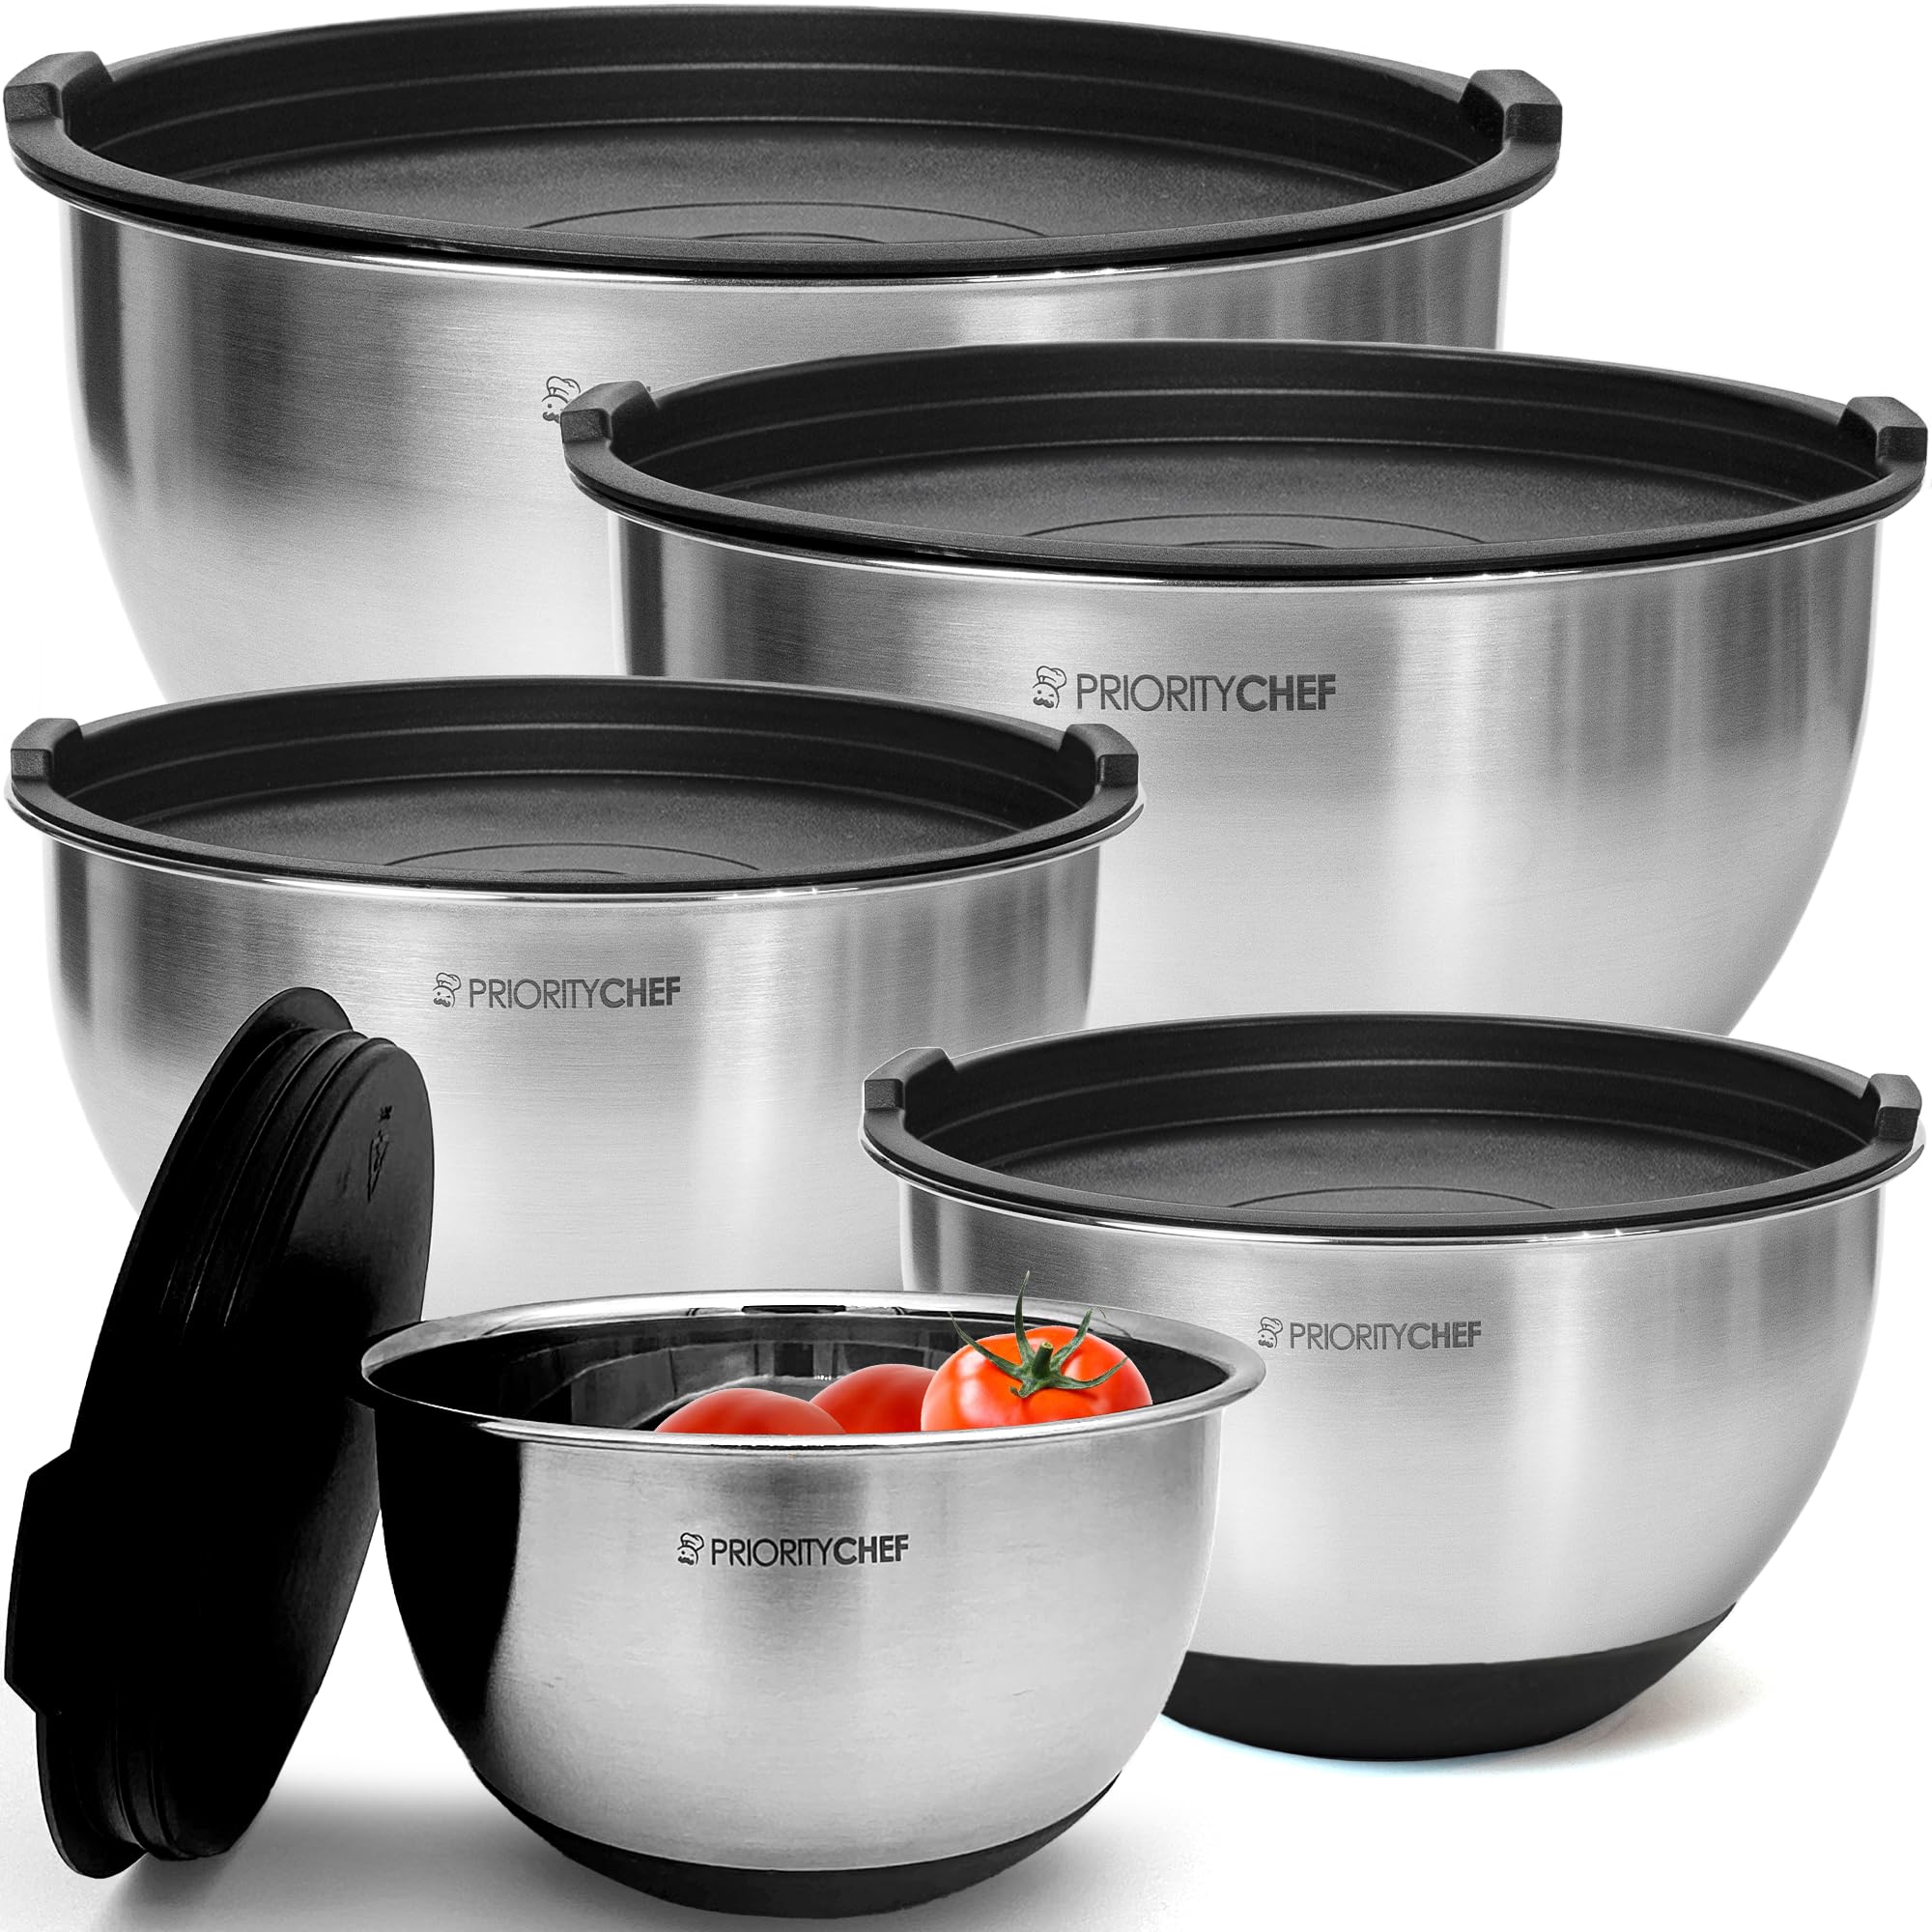 Priority Chef Premium Mixing Bowls With Airtight Lids Set, Thicker Stainless Steel Mixing Bowl Set, Large Prep Metal Bowls with